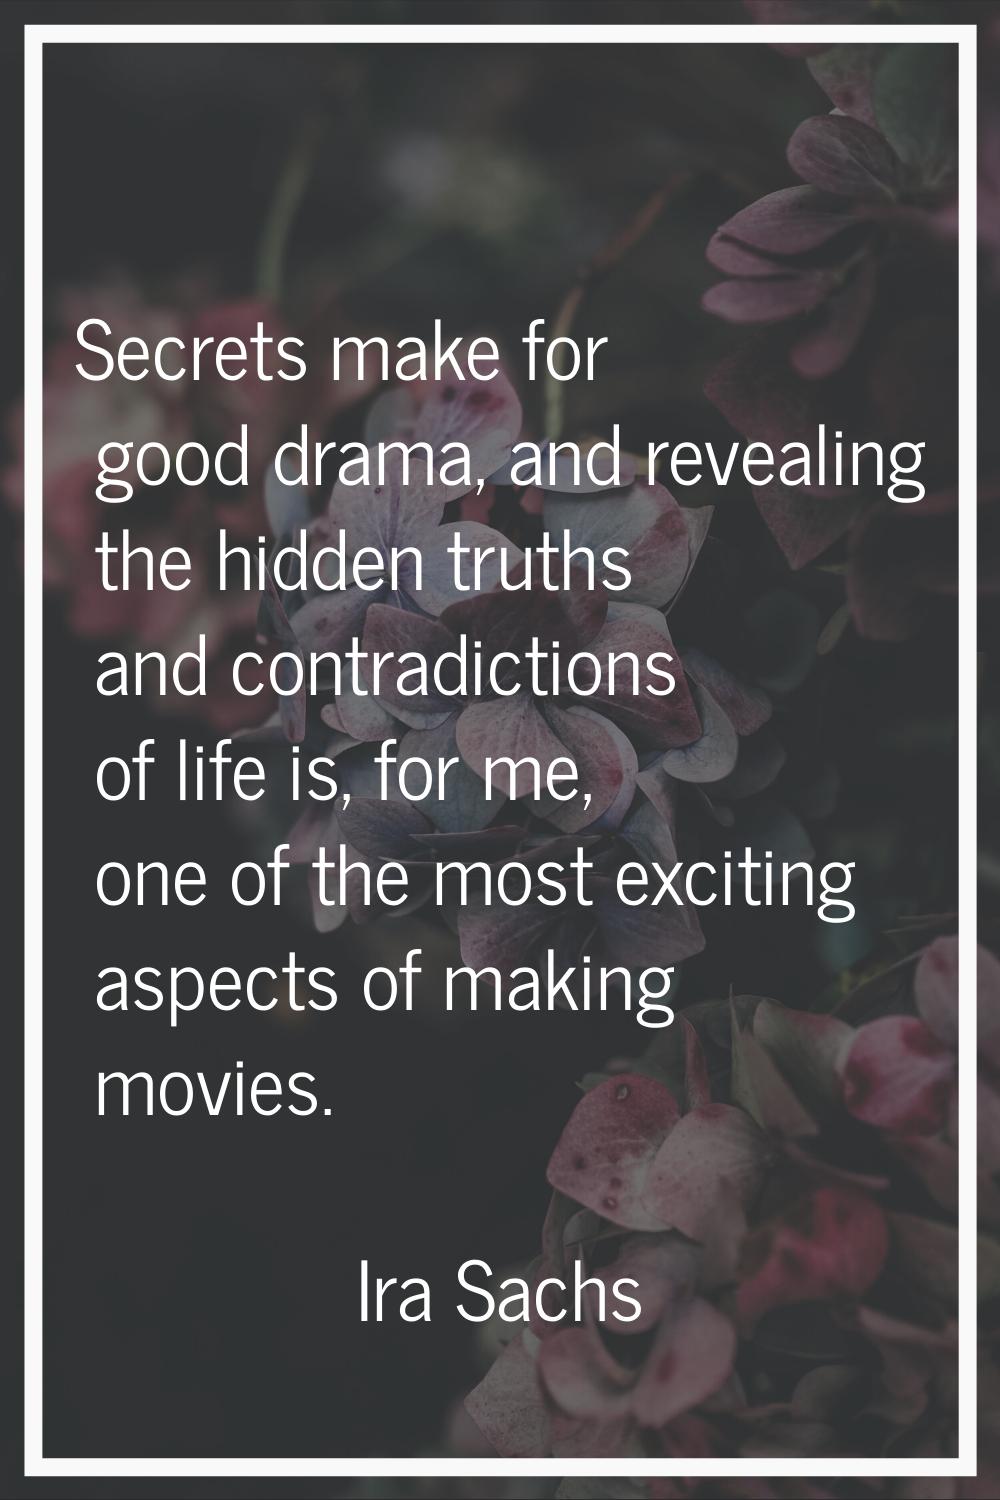 Secrets make for good drama, and revealing the hidden truths and contradictions of life is, for me,